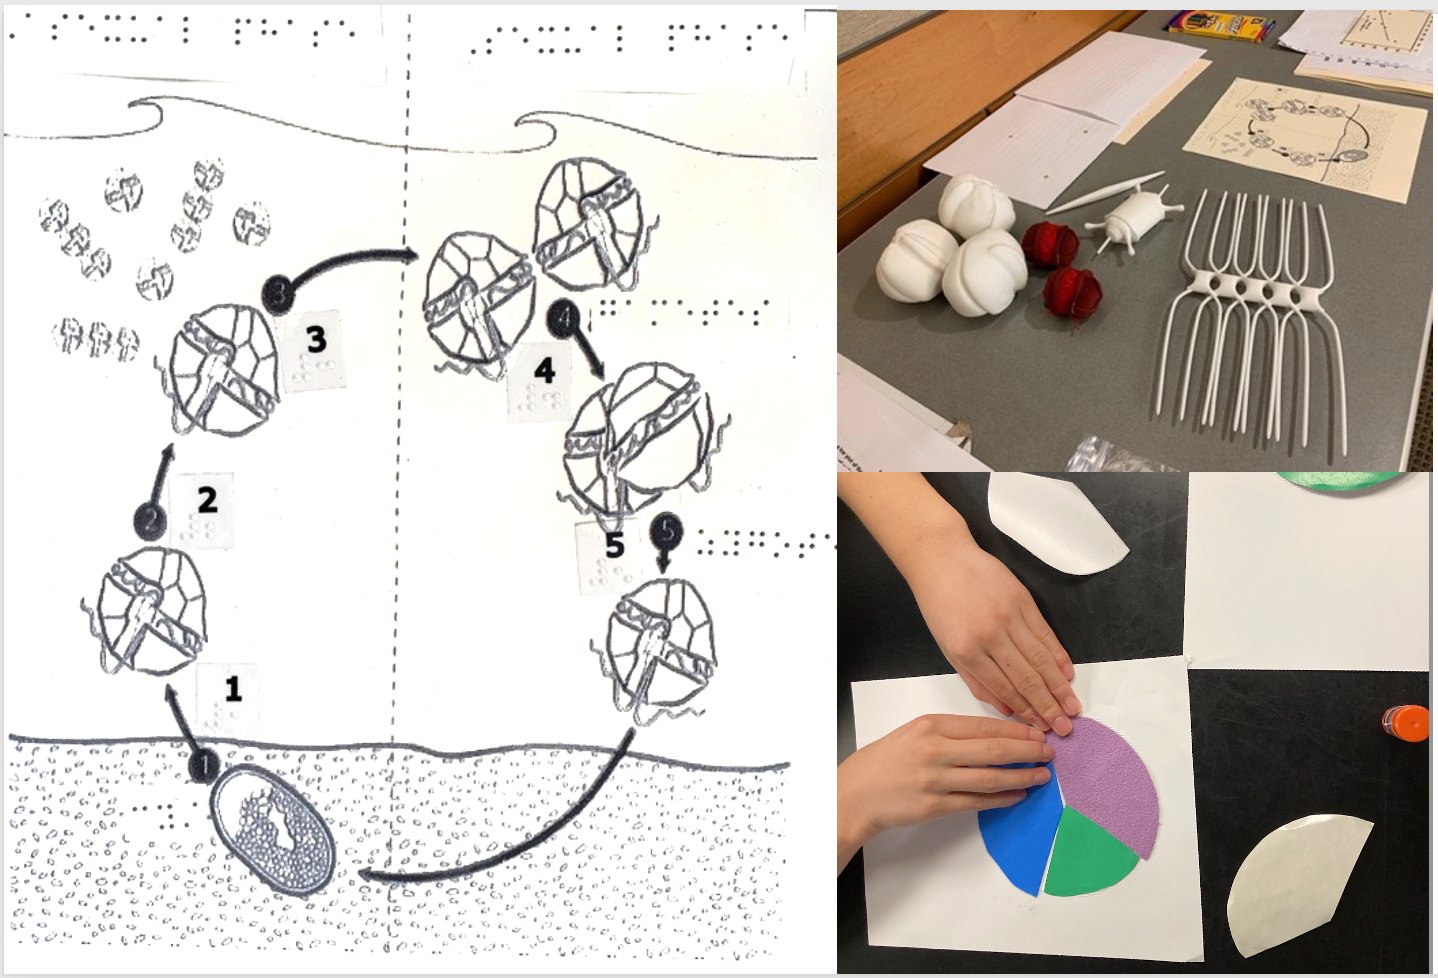 Examples of materials adaptations specified in WHCOHH educational activities for visually impaired students: raised line drawings and braille captioning (left), 3-D printed models of phytoplankton species (top right), textured paper (bottom right).